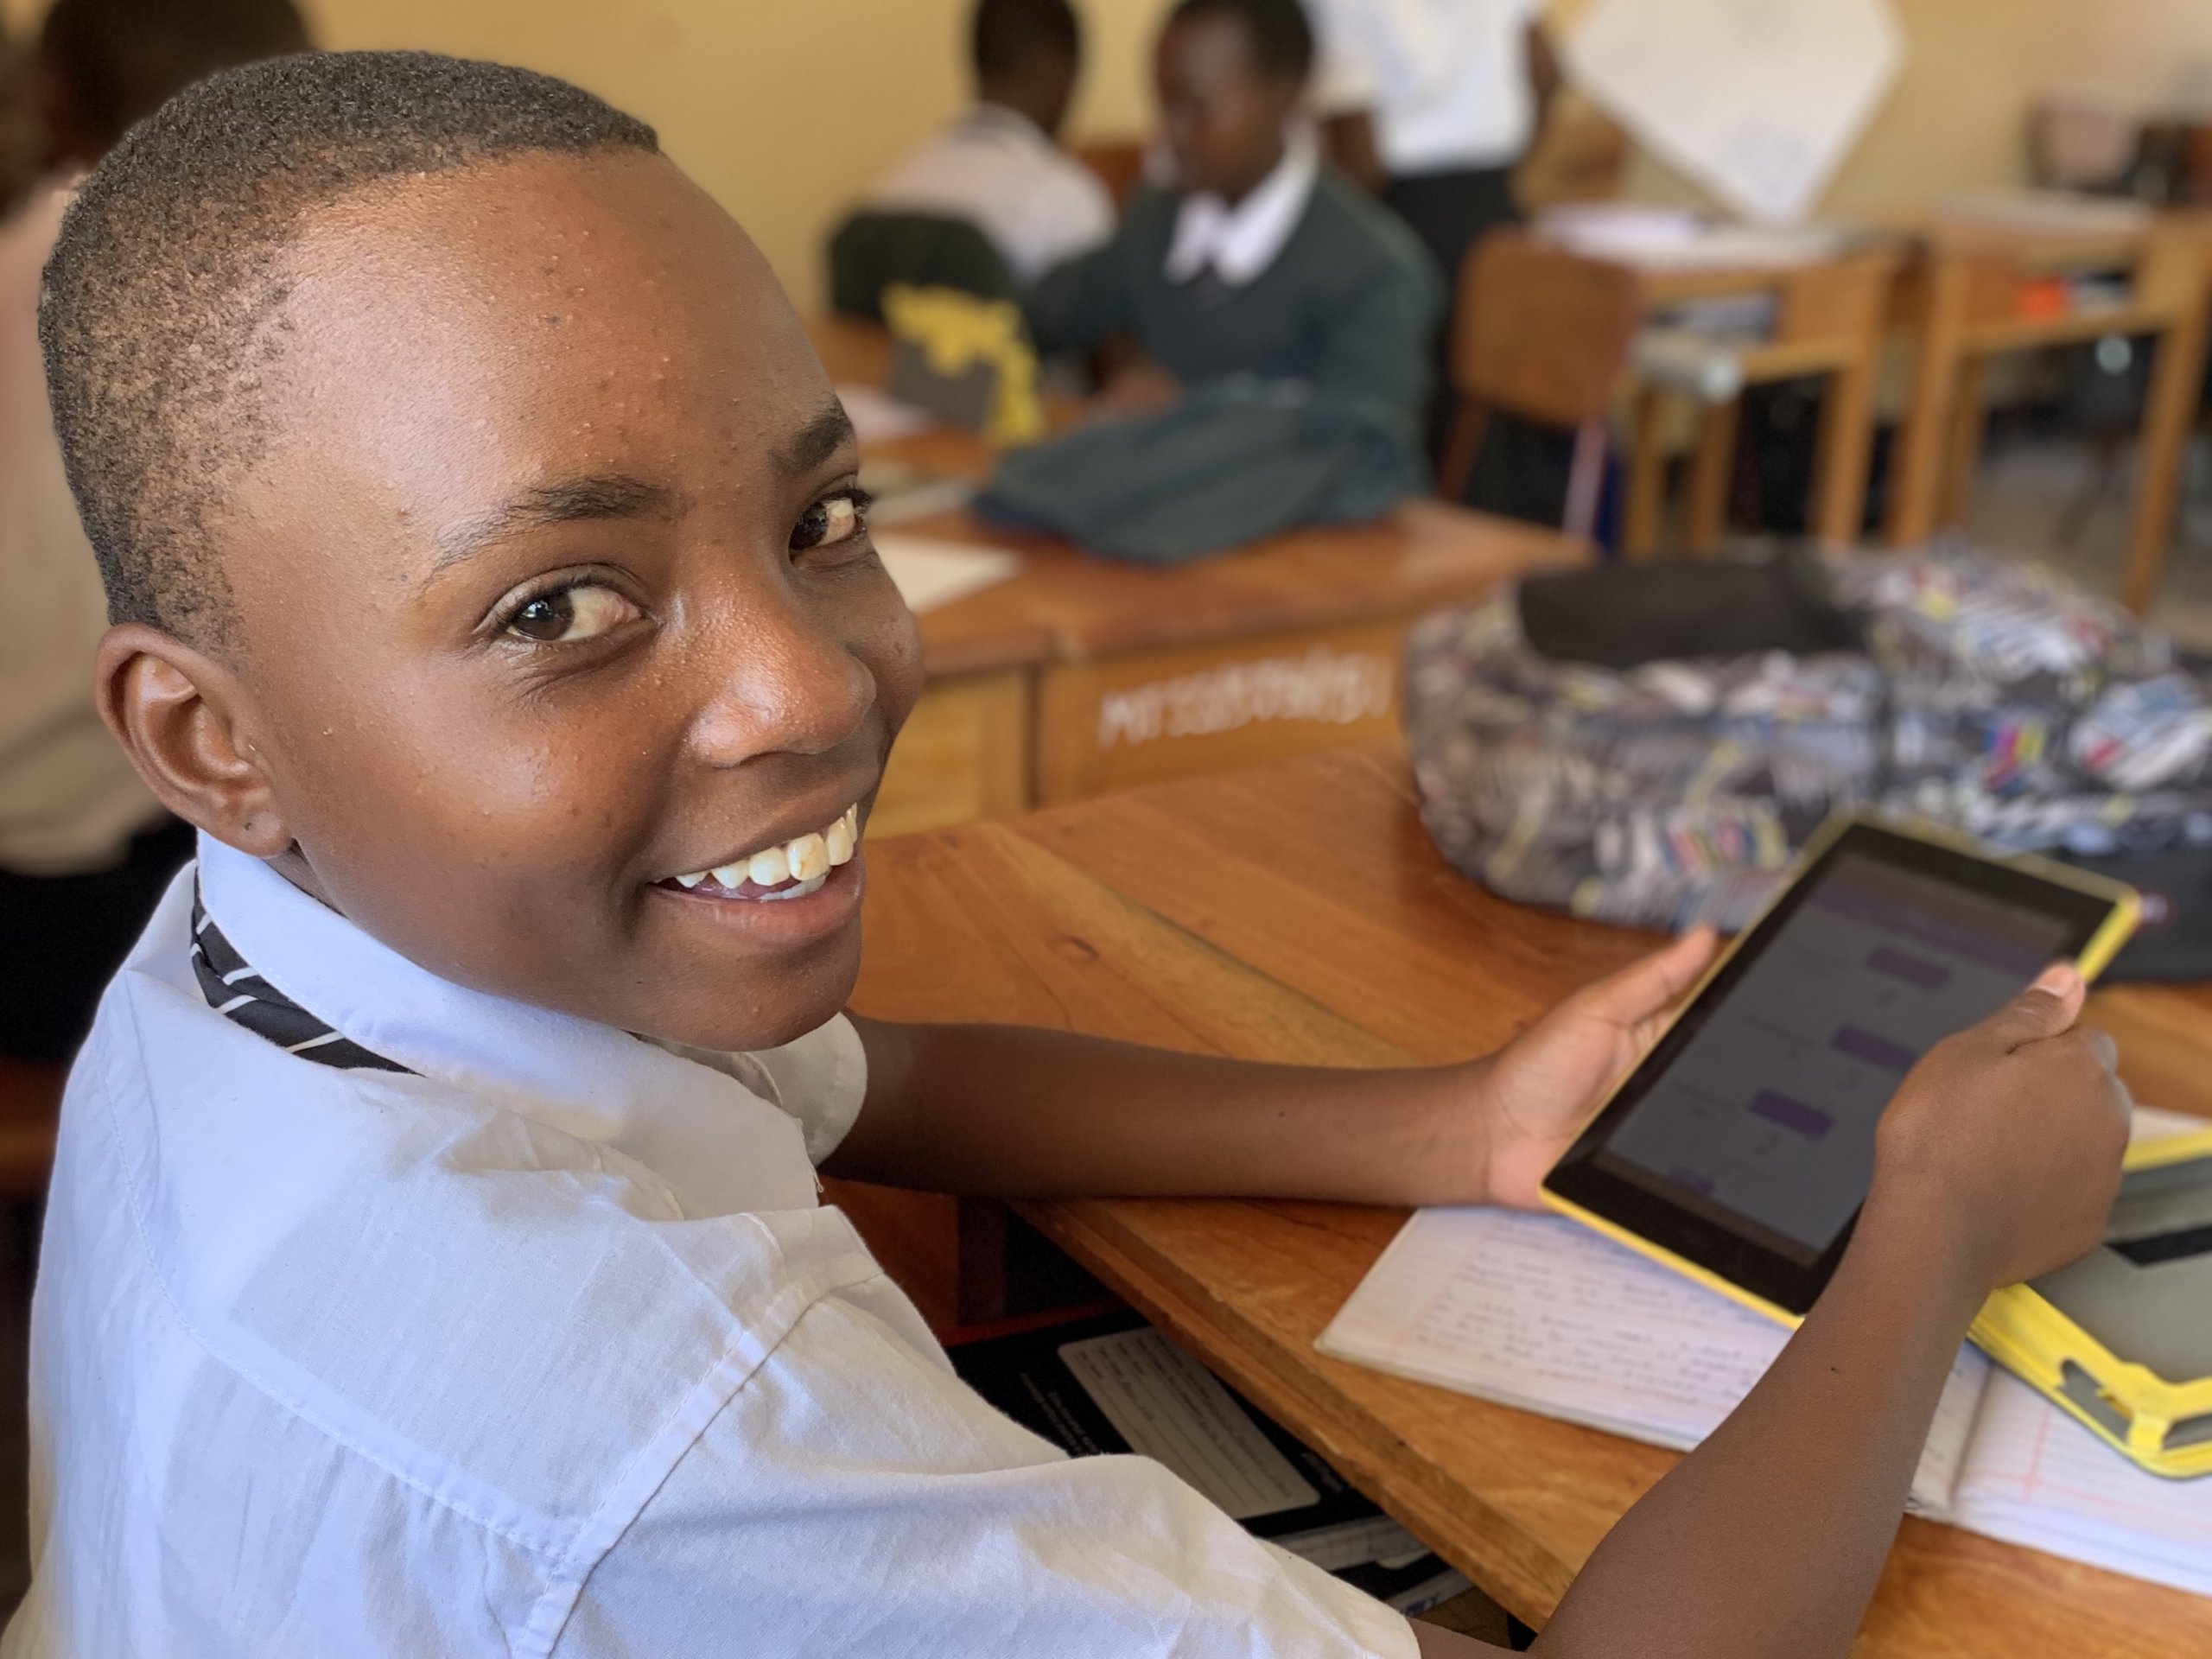 A student smiles brightly over his shoulder, while holding a tablet displaying the Quest app in his secondary school classroom in Tanzania.